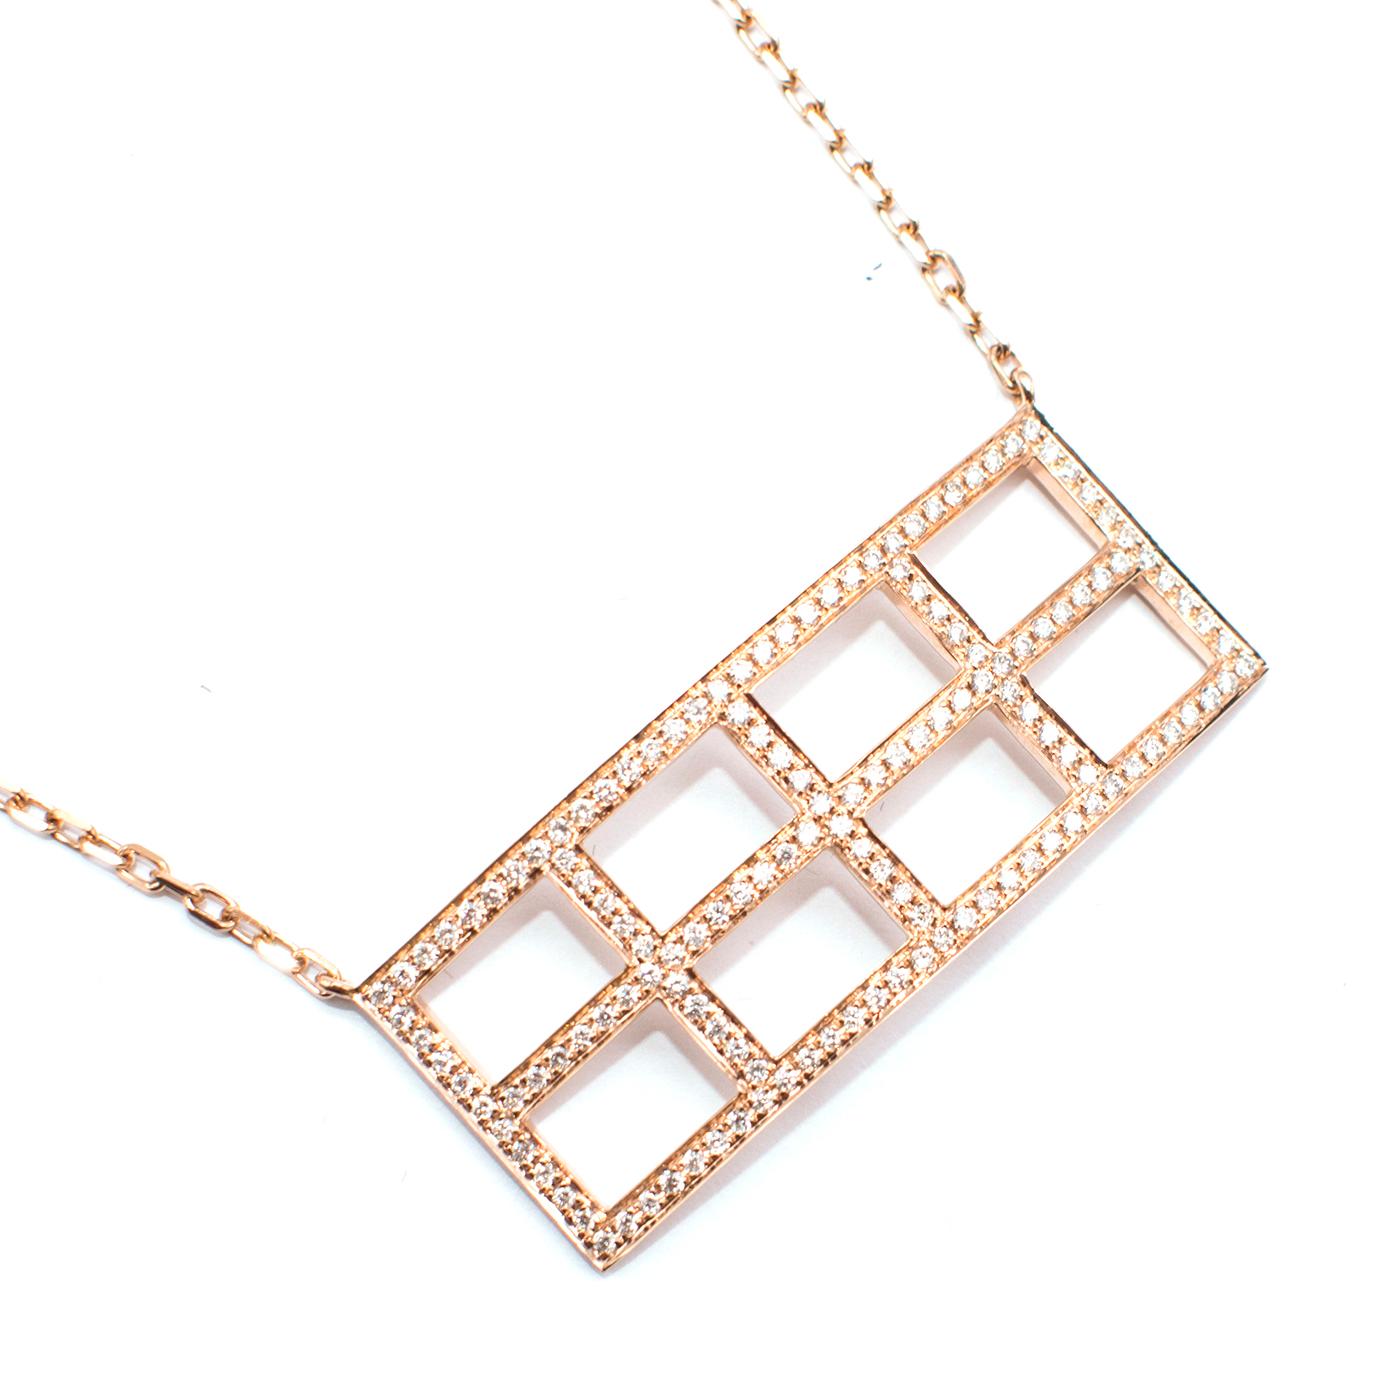 Pia Hallstrom 18k Rose Gold 0.68ct White Diamonds Gridd Necklace

-18k high quality rose gold necklace
-0.68ct high quality white diamond grid pendant
-Fine chain
-Lobster clasp closure
-Mid weight pendent
-End of the line 
-High quality and brand